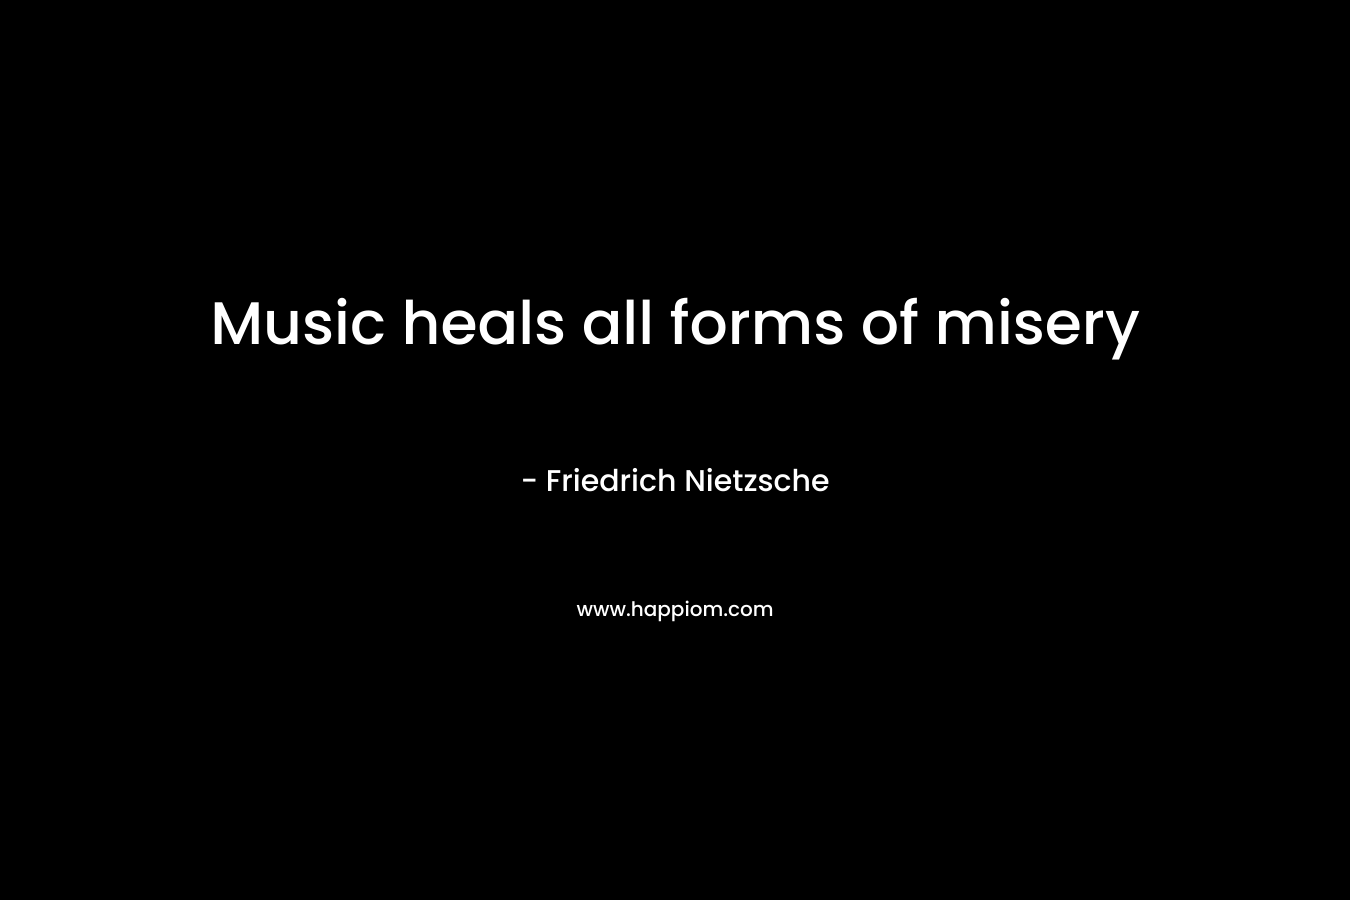 Music heals all forms of misery